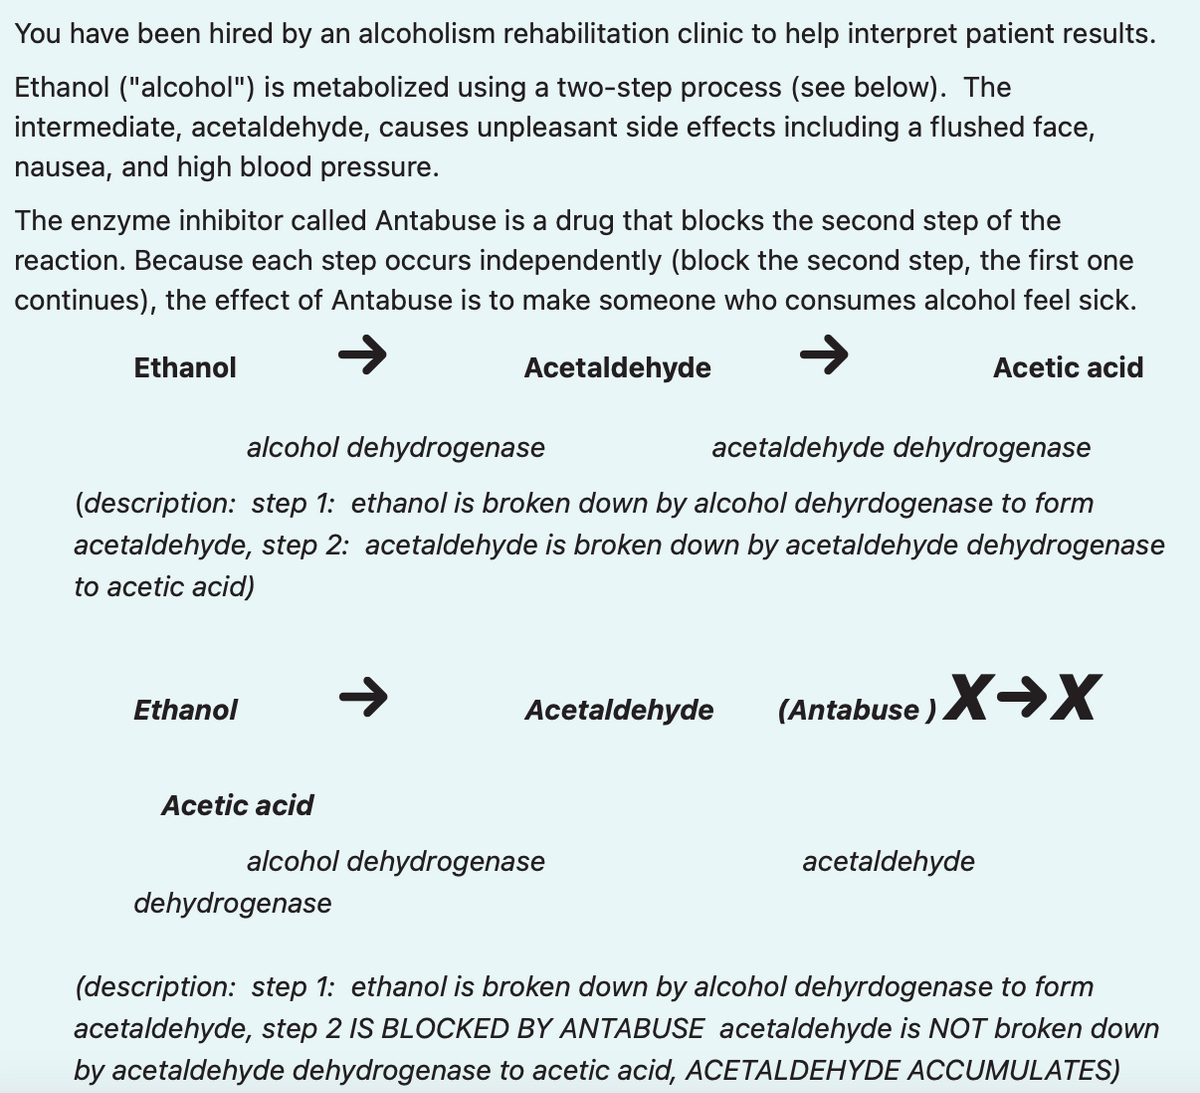 You have been hired by an alcoholism rehabilitation clinic to help interpret patient results.
Ethanol ("alcohol") is metabolized using a two-step process (see below). The
intermediate, acetaldehyde, causes unpleasant side effects including a flushed face,
nausea, and high blood pressure.
The enzyme inhibitor called Antabuse is a drug that blocks the second step of the
reaction. Because each step occurs independently (block the second step, the first one
continues), the effect of Antabuse is to make someone who consumes alcohol feel sick.
Ethanol
Ethanol
alcohol dehydrogenase
acetaldehyde dehydrogenase
(description: step 1: ethanol is broken down by alcohol dehyrdogenase to form
acetaldehyde, step 2: acetaldehyde is broken down by acetaldehyde dehydrogenase
to acetic acid)
Acetic acid
Acetaldehyde
dehydrogenase
Acetaldehyde
alcohol dehydrogenase
Acetic acid
(Antabuse) X→X
acetaldehyde
(description: step 1: ethanol is broken down by alcohol dehyrdogenase to form
acetaldehyde, step 2 IS BLOCKED BY ANTABUSE acetaldehyde is NOT broken down
by acetaldehyde dehydrogenase to acetic acid, ACETALDEHYDE ACCUMULATES)